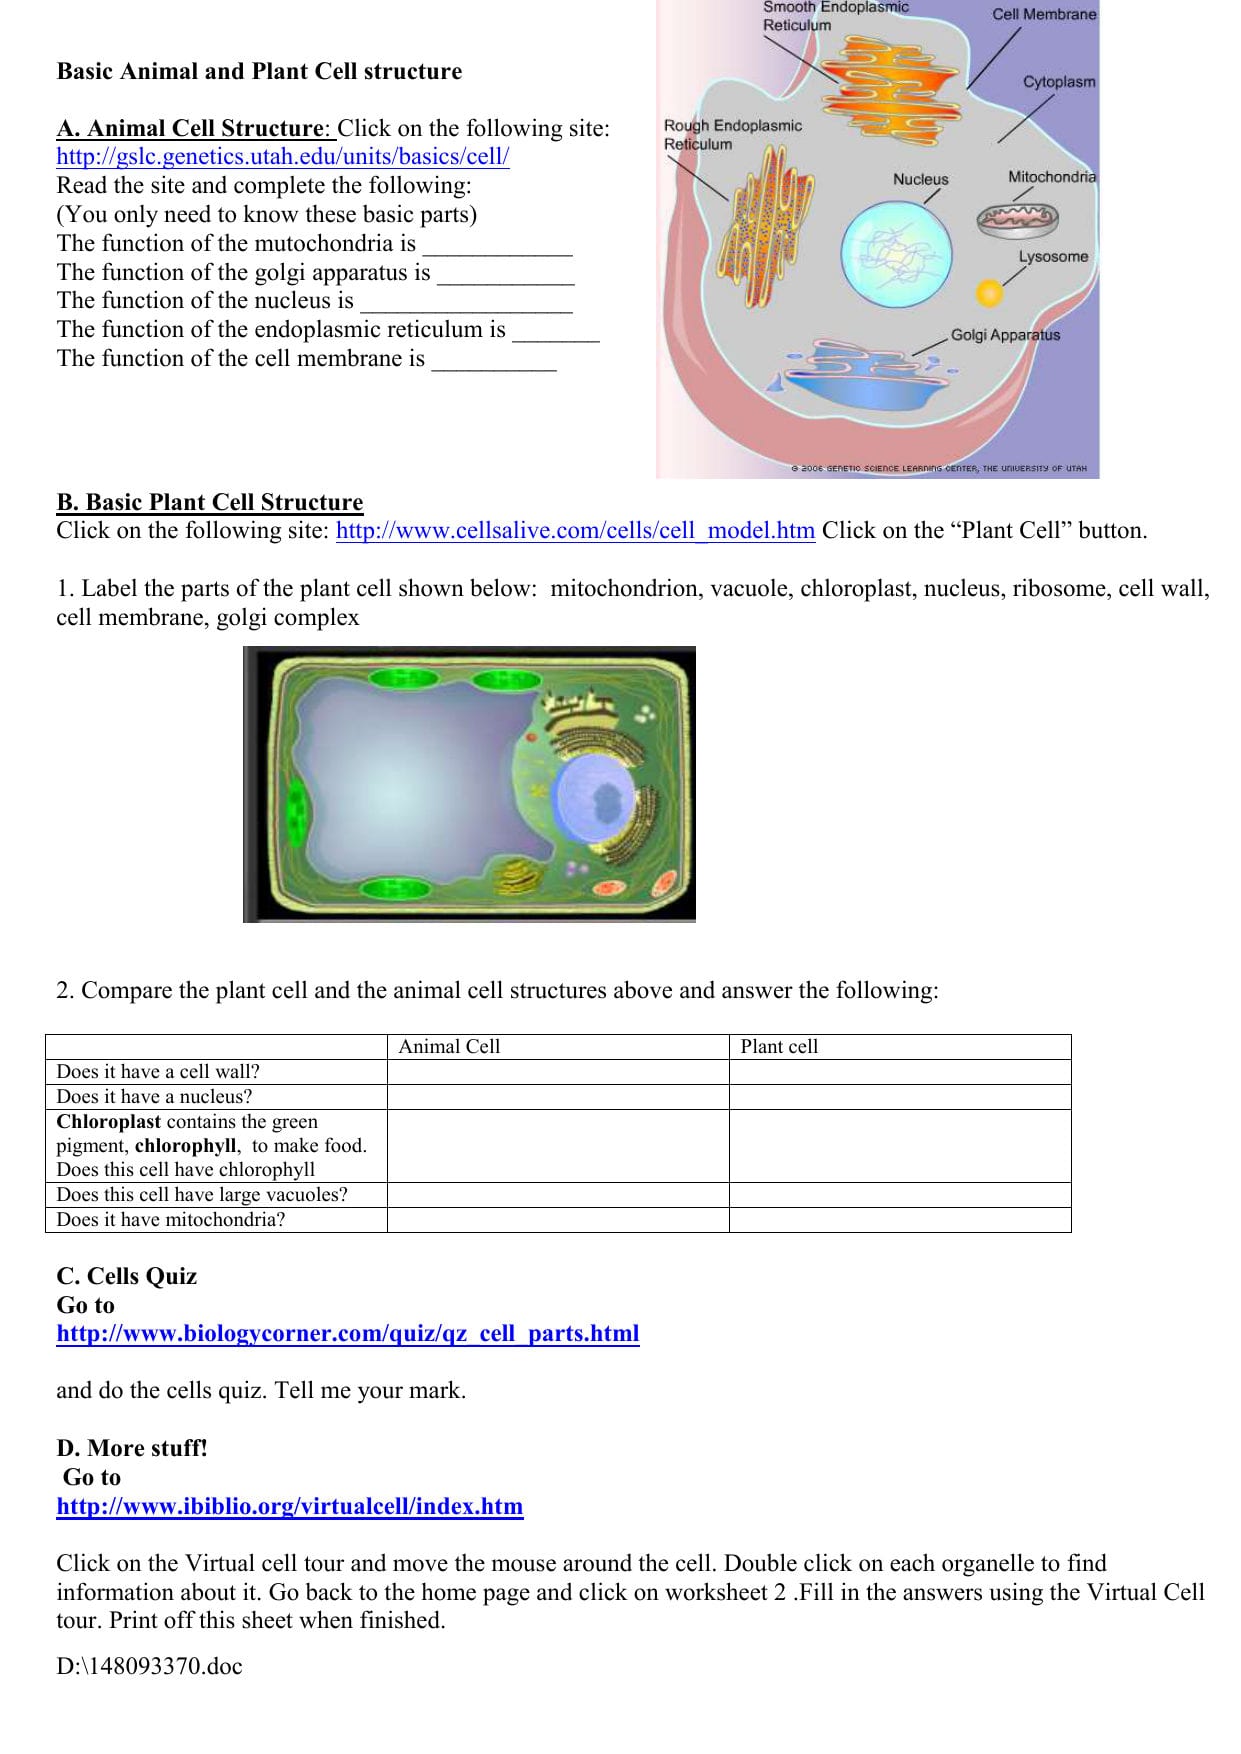 cells-alive-plant-cell-worksheet-answer-key-db-excel